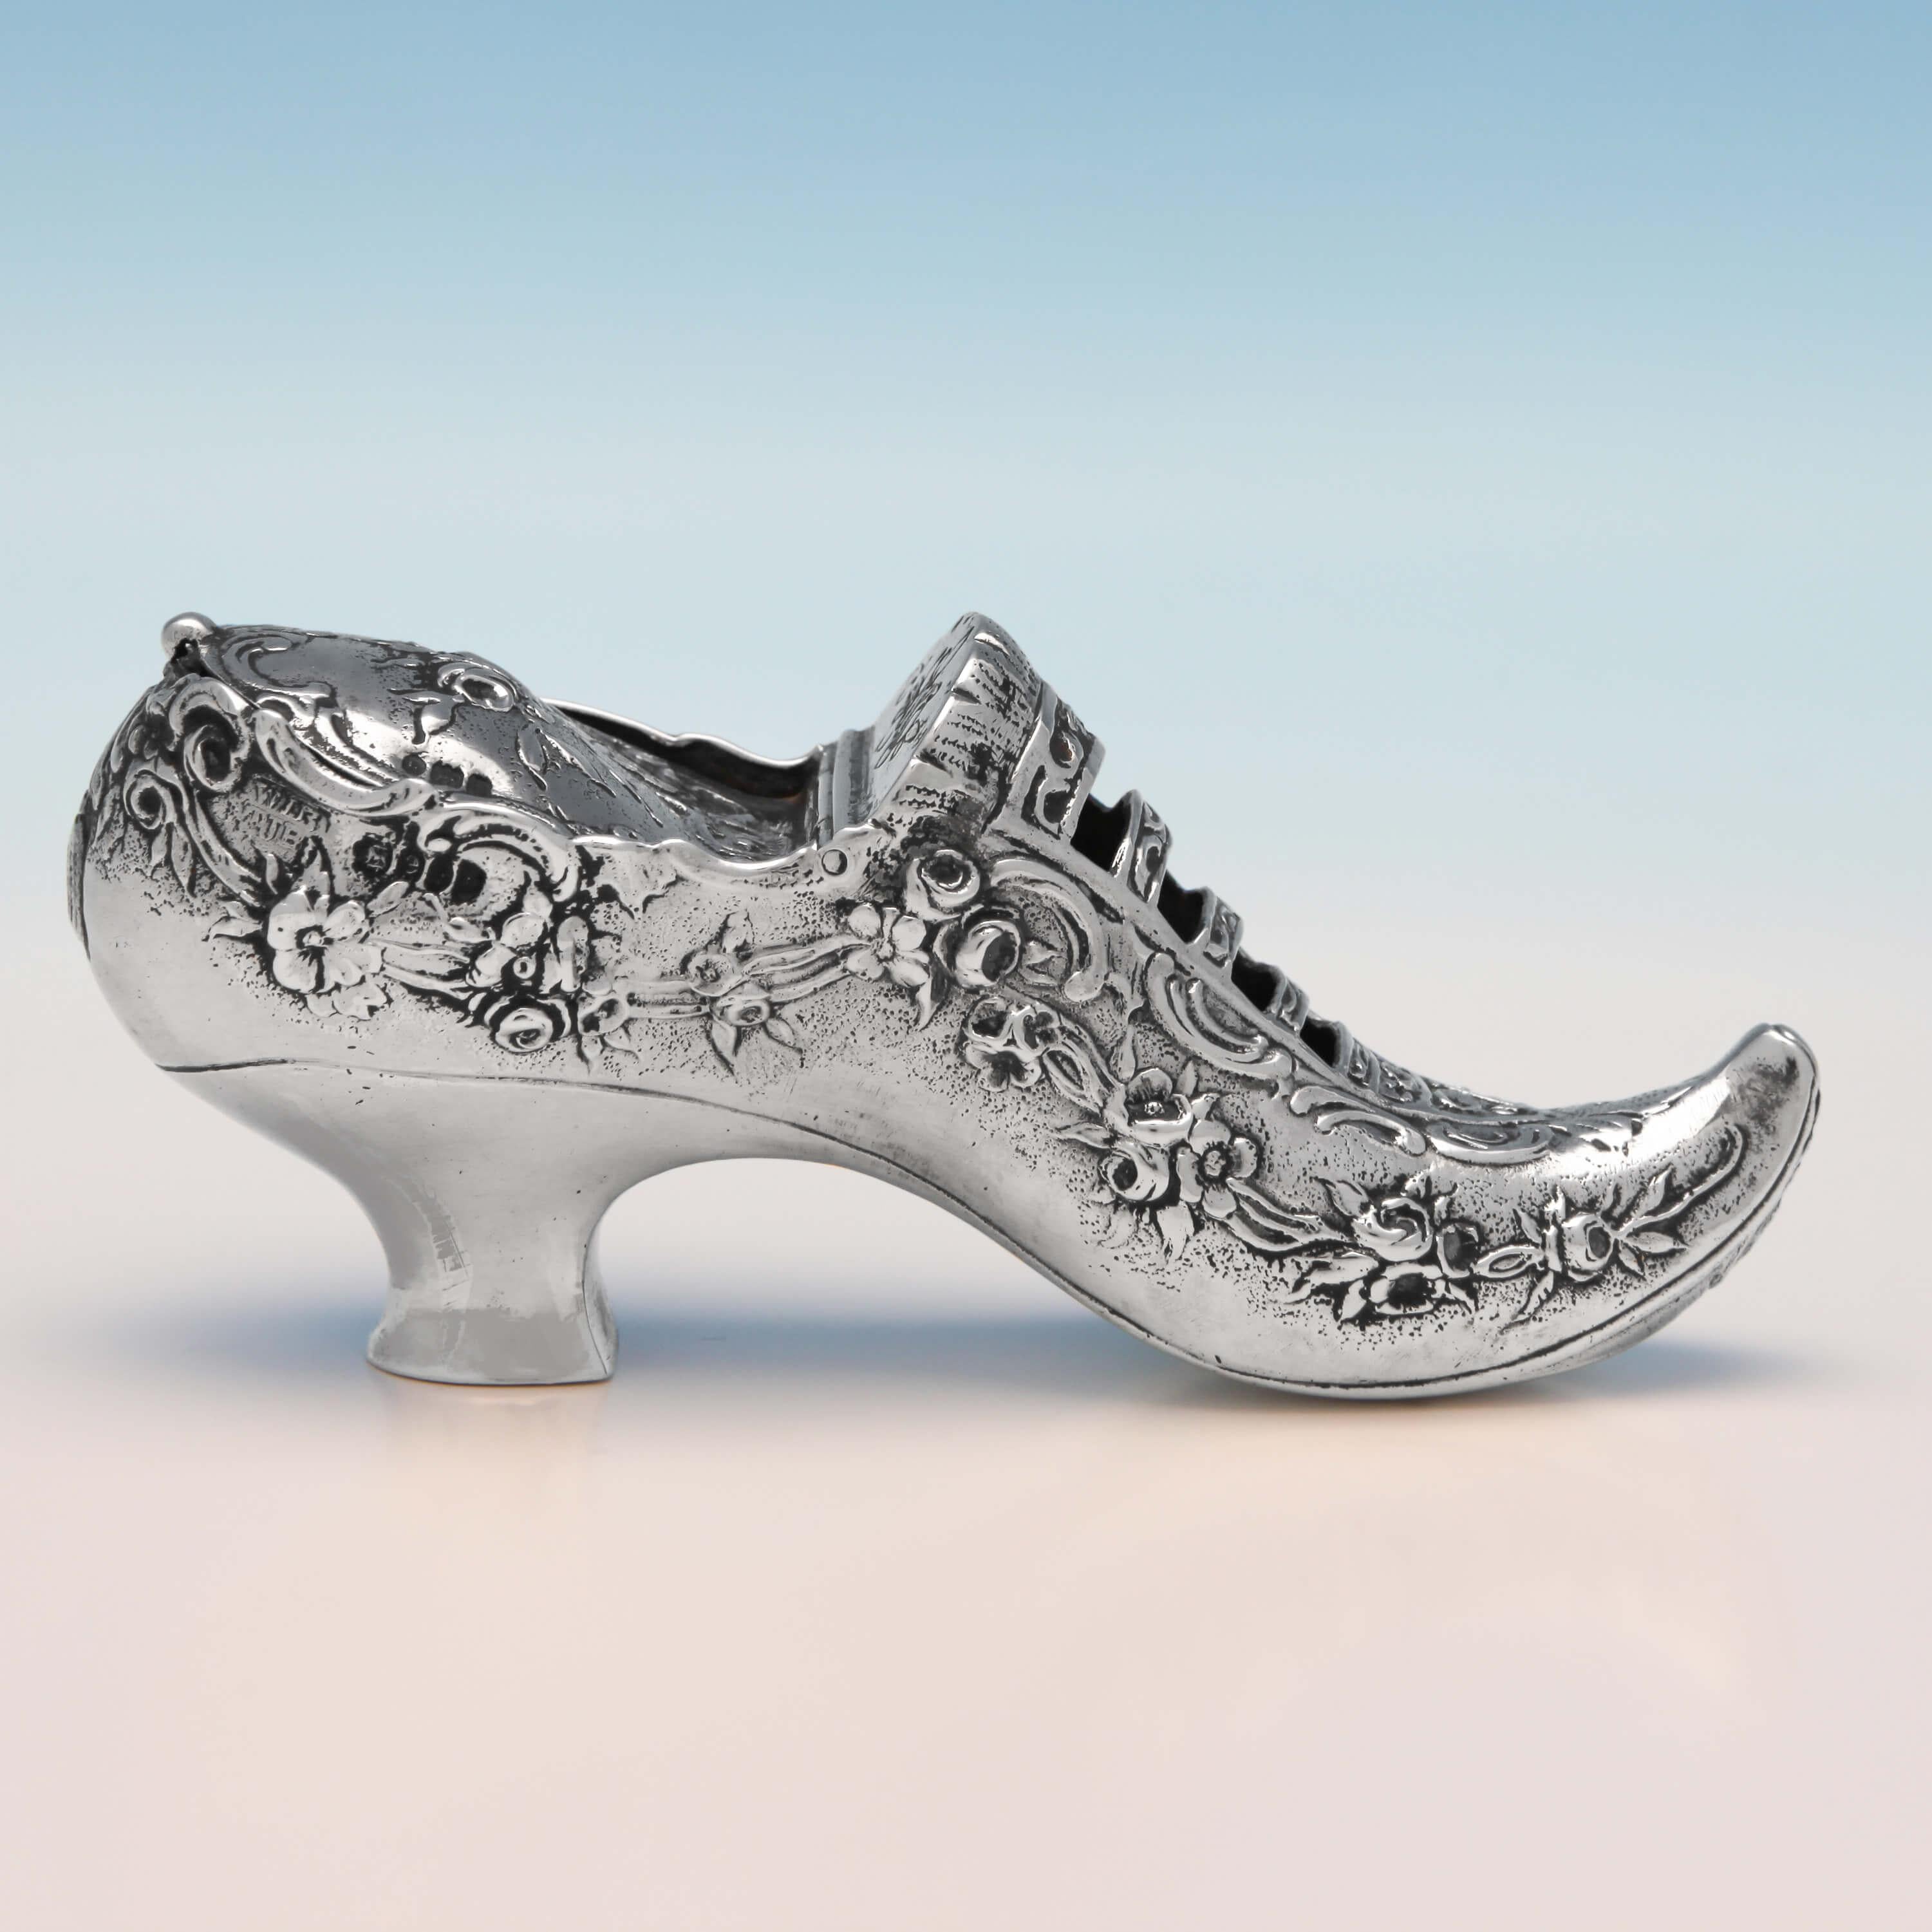 English Victorian Novelty Sterling Silver Trinket Box Modelled as a Shoe